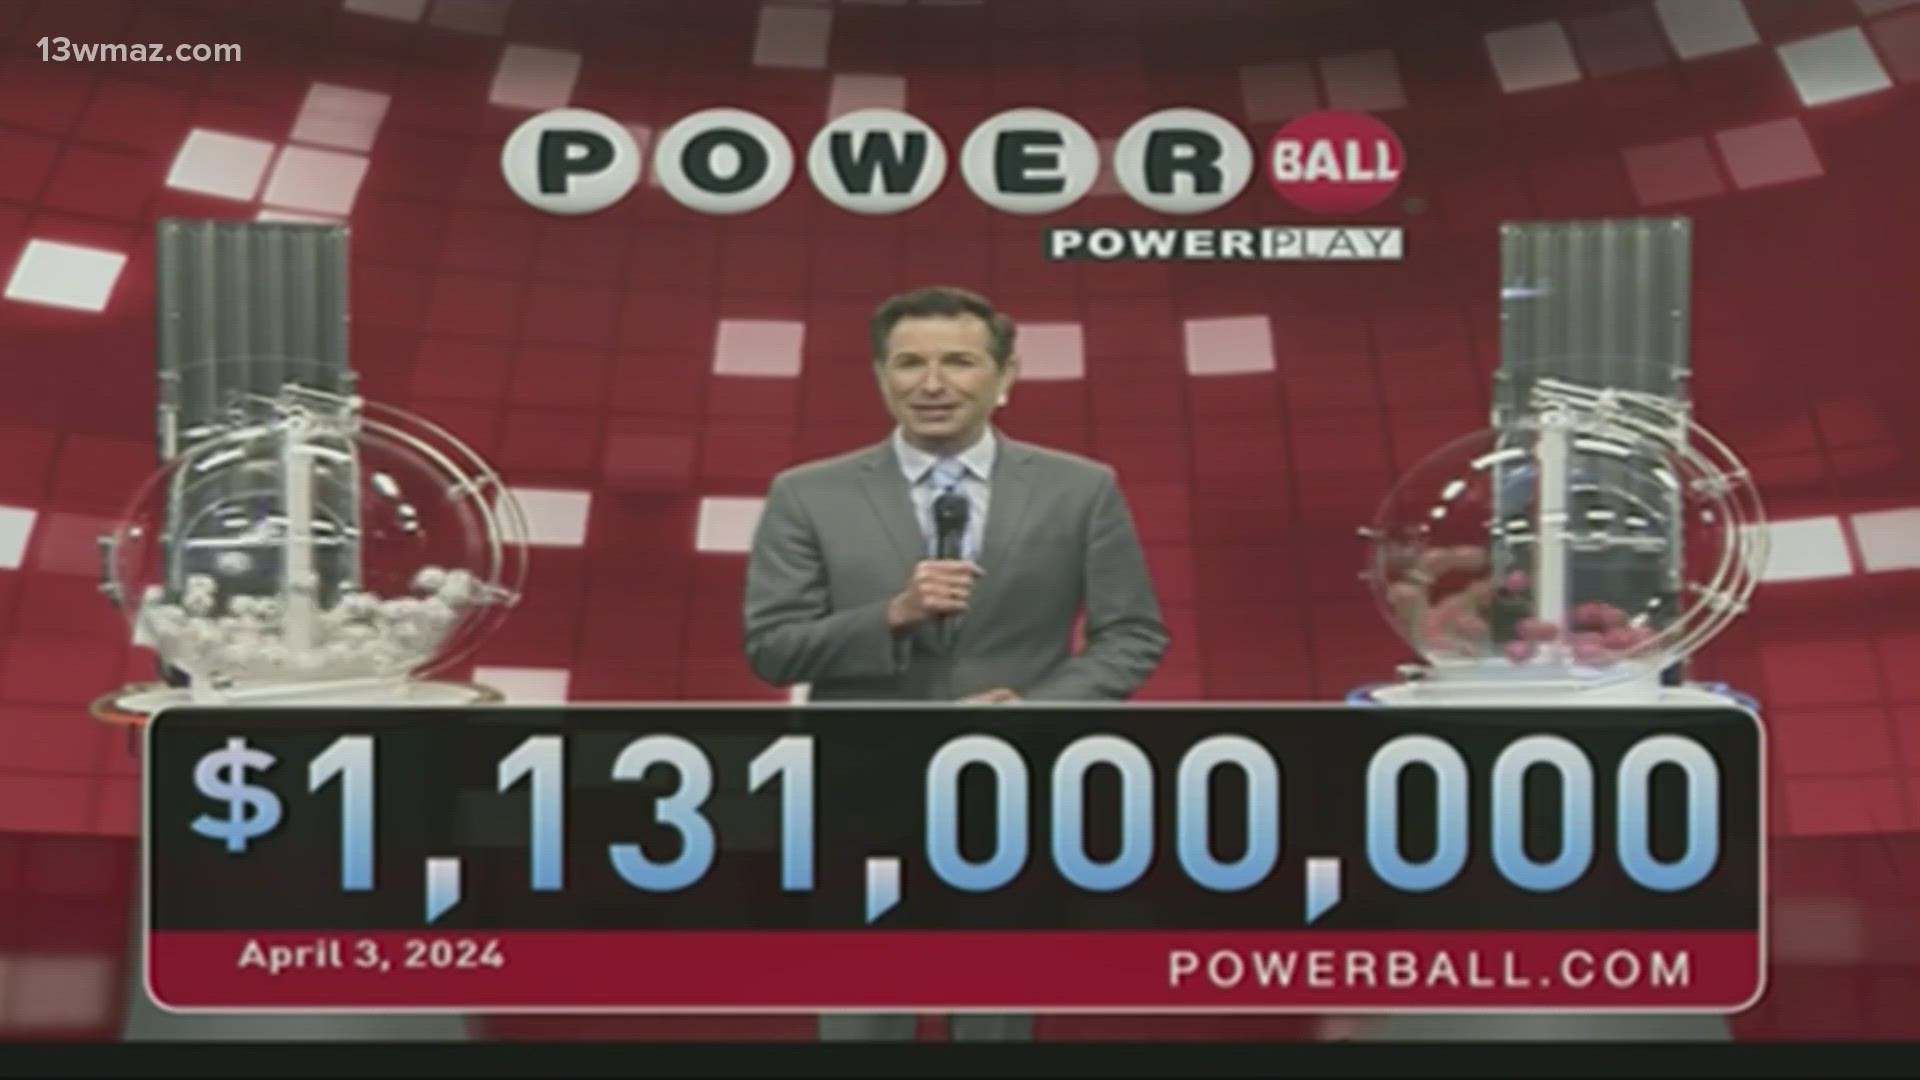 Here are your winning Powerball numbers for April 3,2023's $1.131 billion jackpot. What would you do with that kind of money?